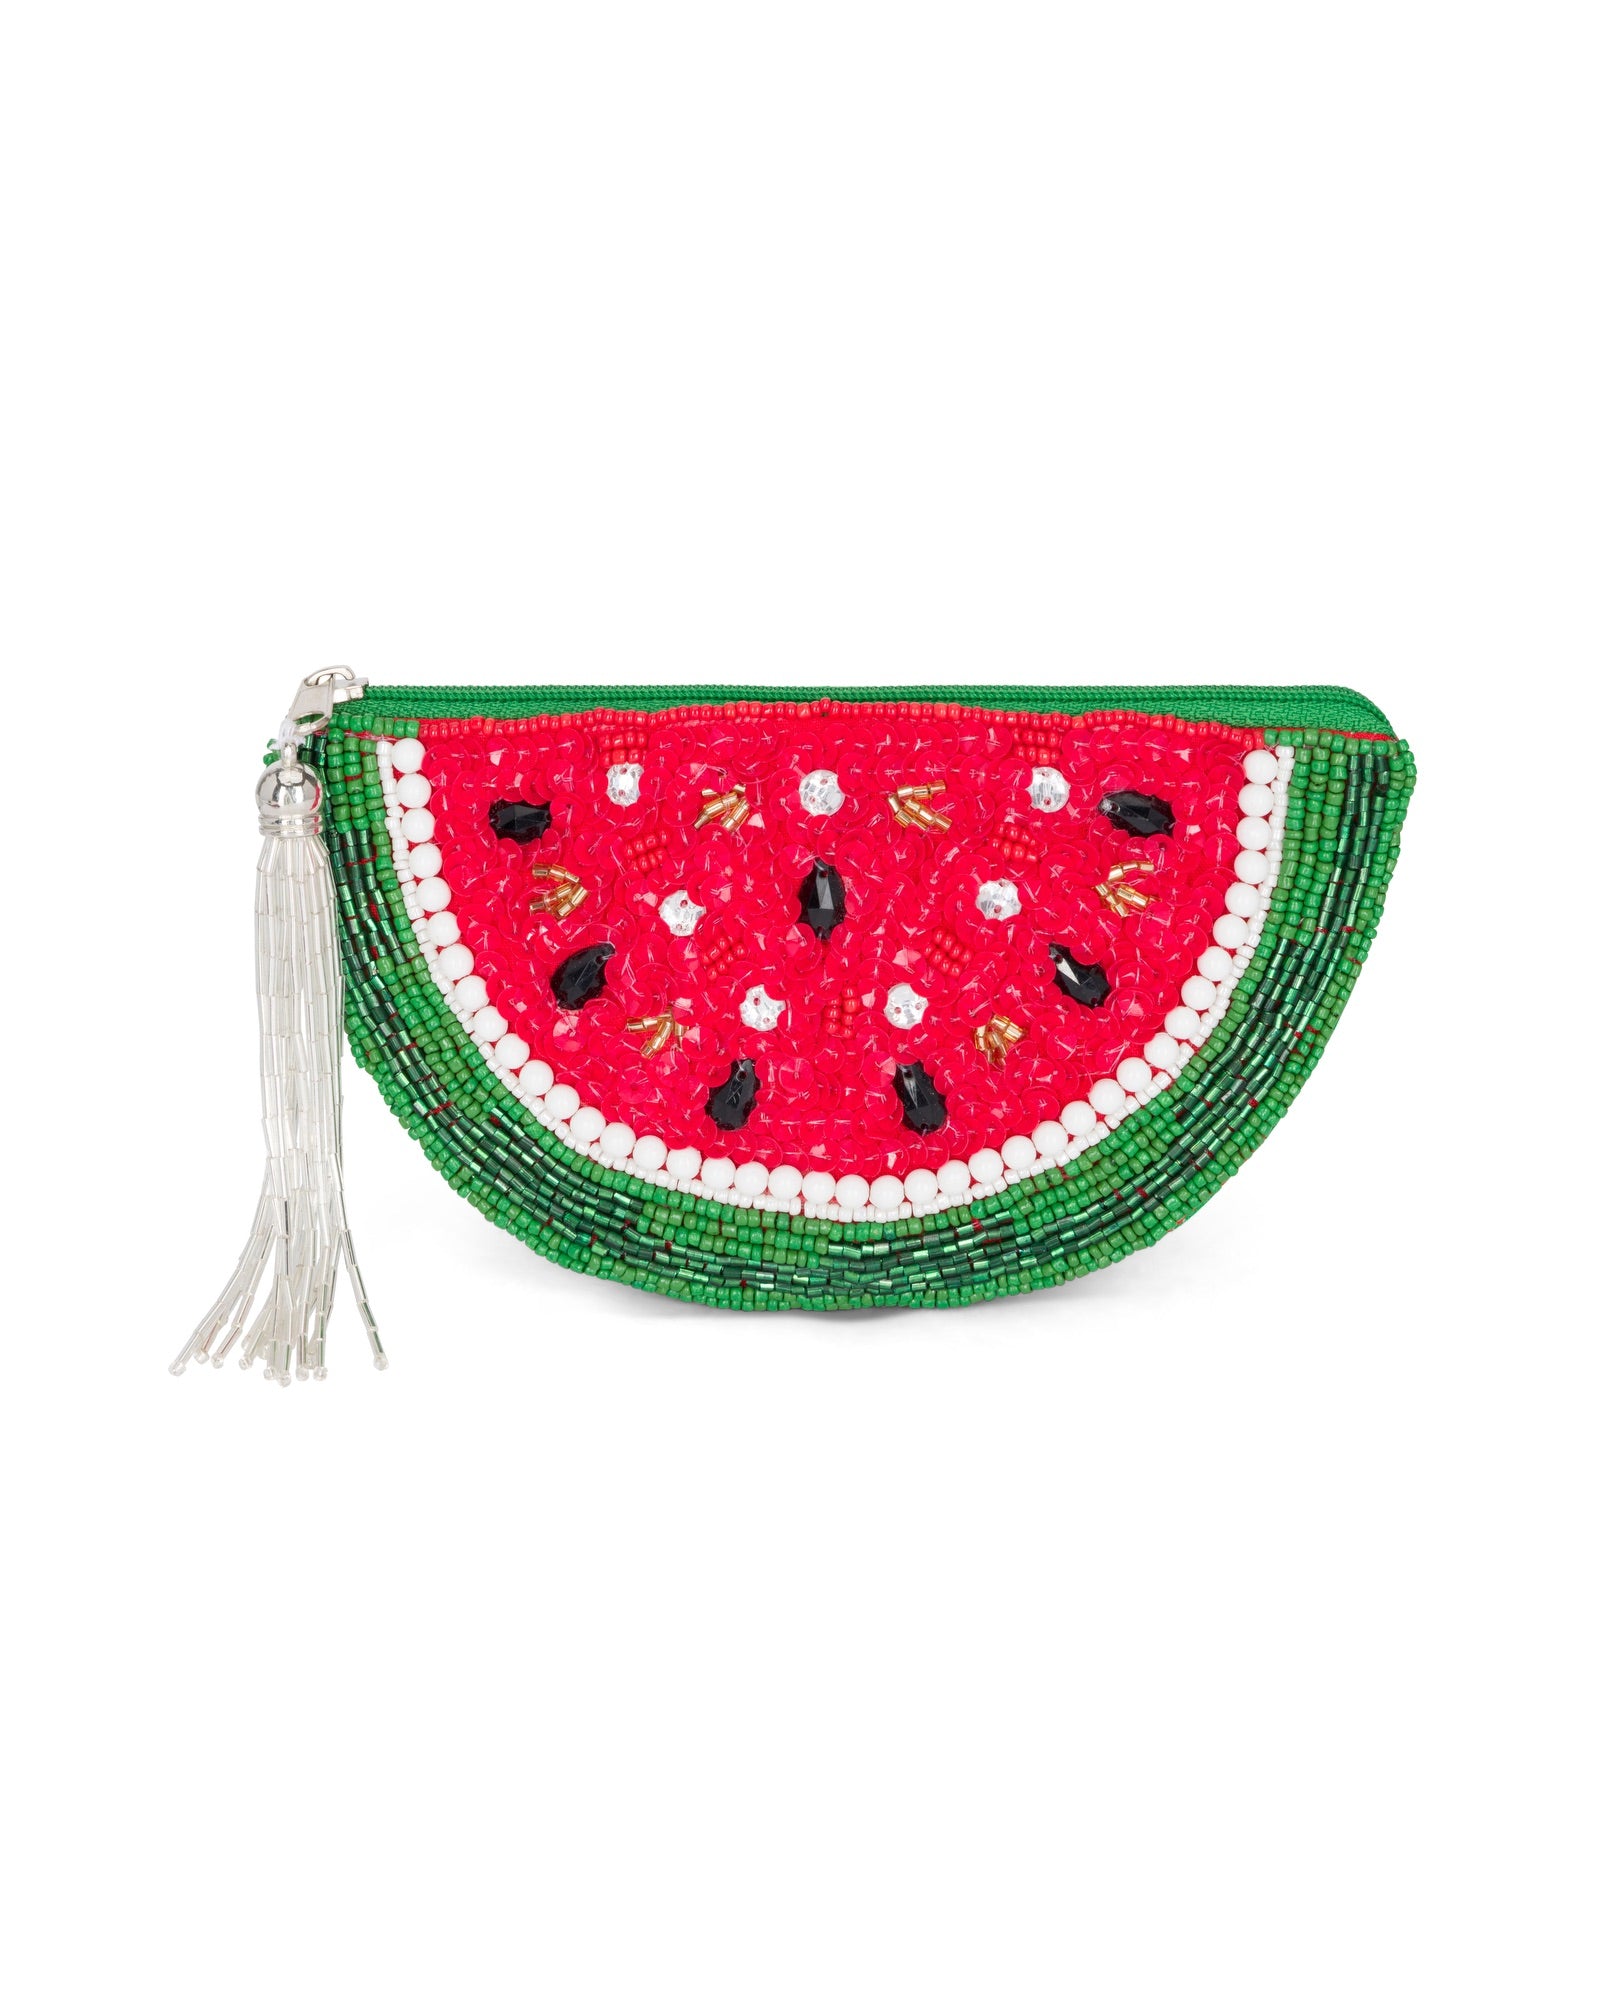 Watermelon melon summertime themed clutch purse wallet with rhinestones and beads 